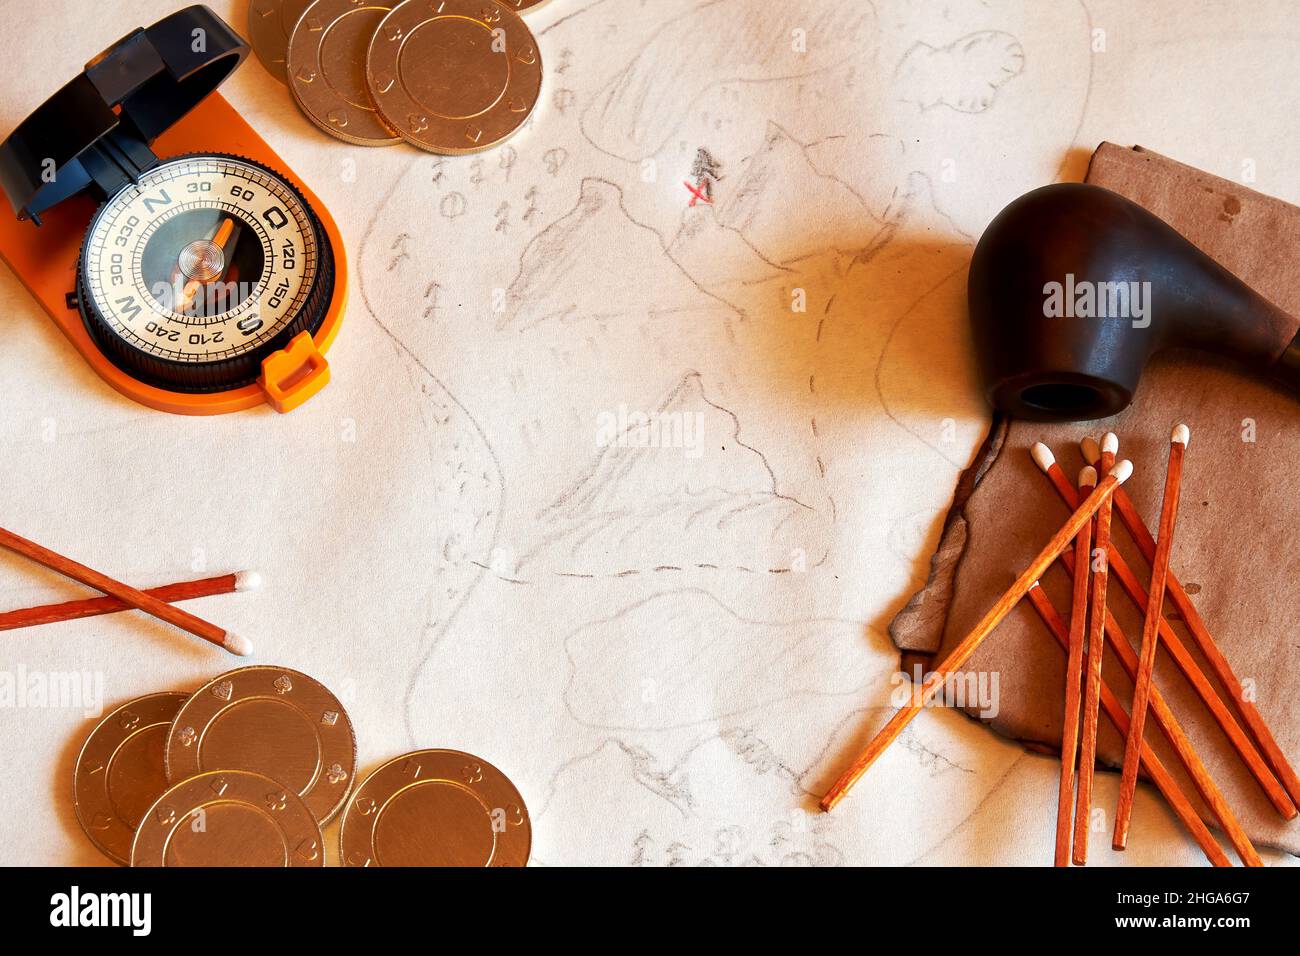 Old Pirate desk with a treasure map, compass, gold coins, and smoking pipe. Adventures, explorations and vintage concepts Stock Photo